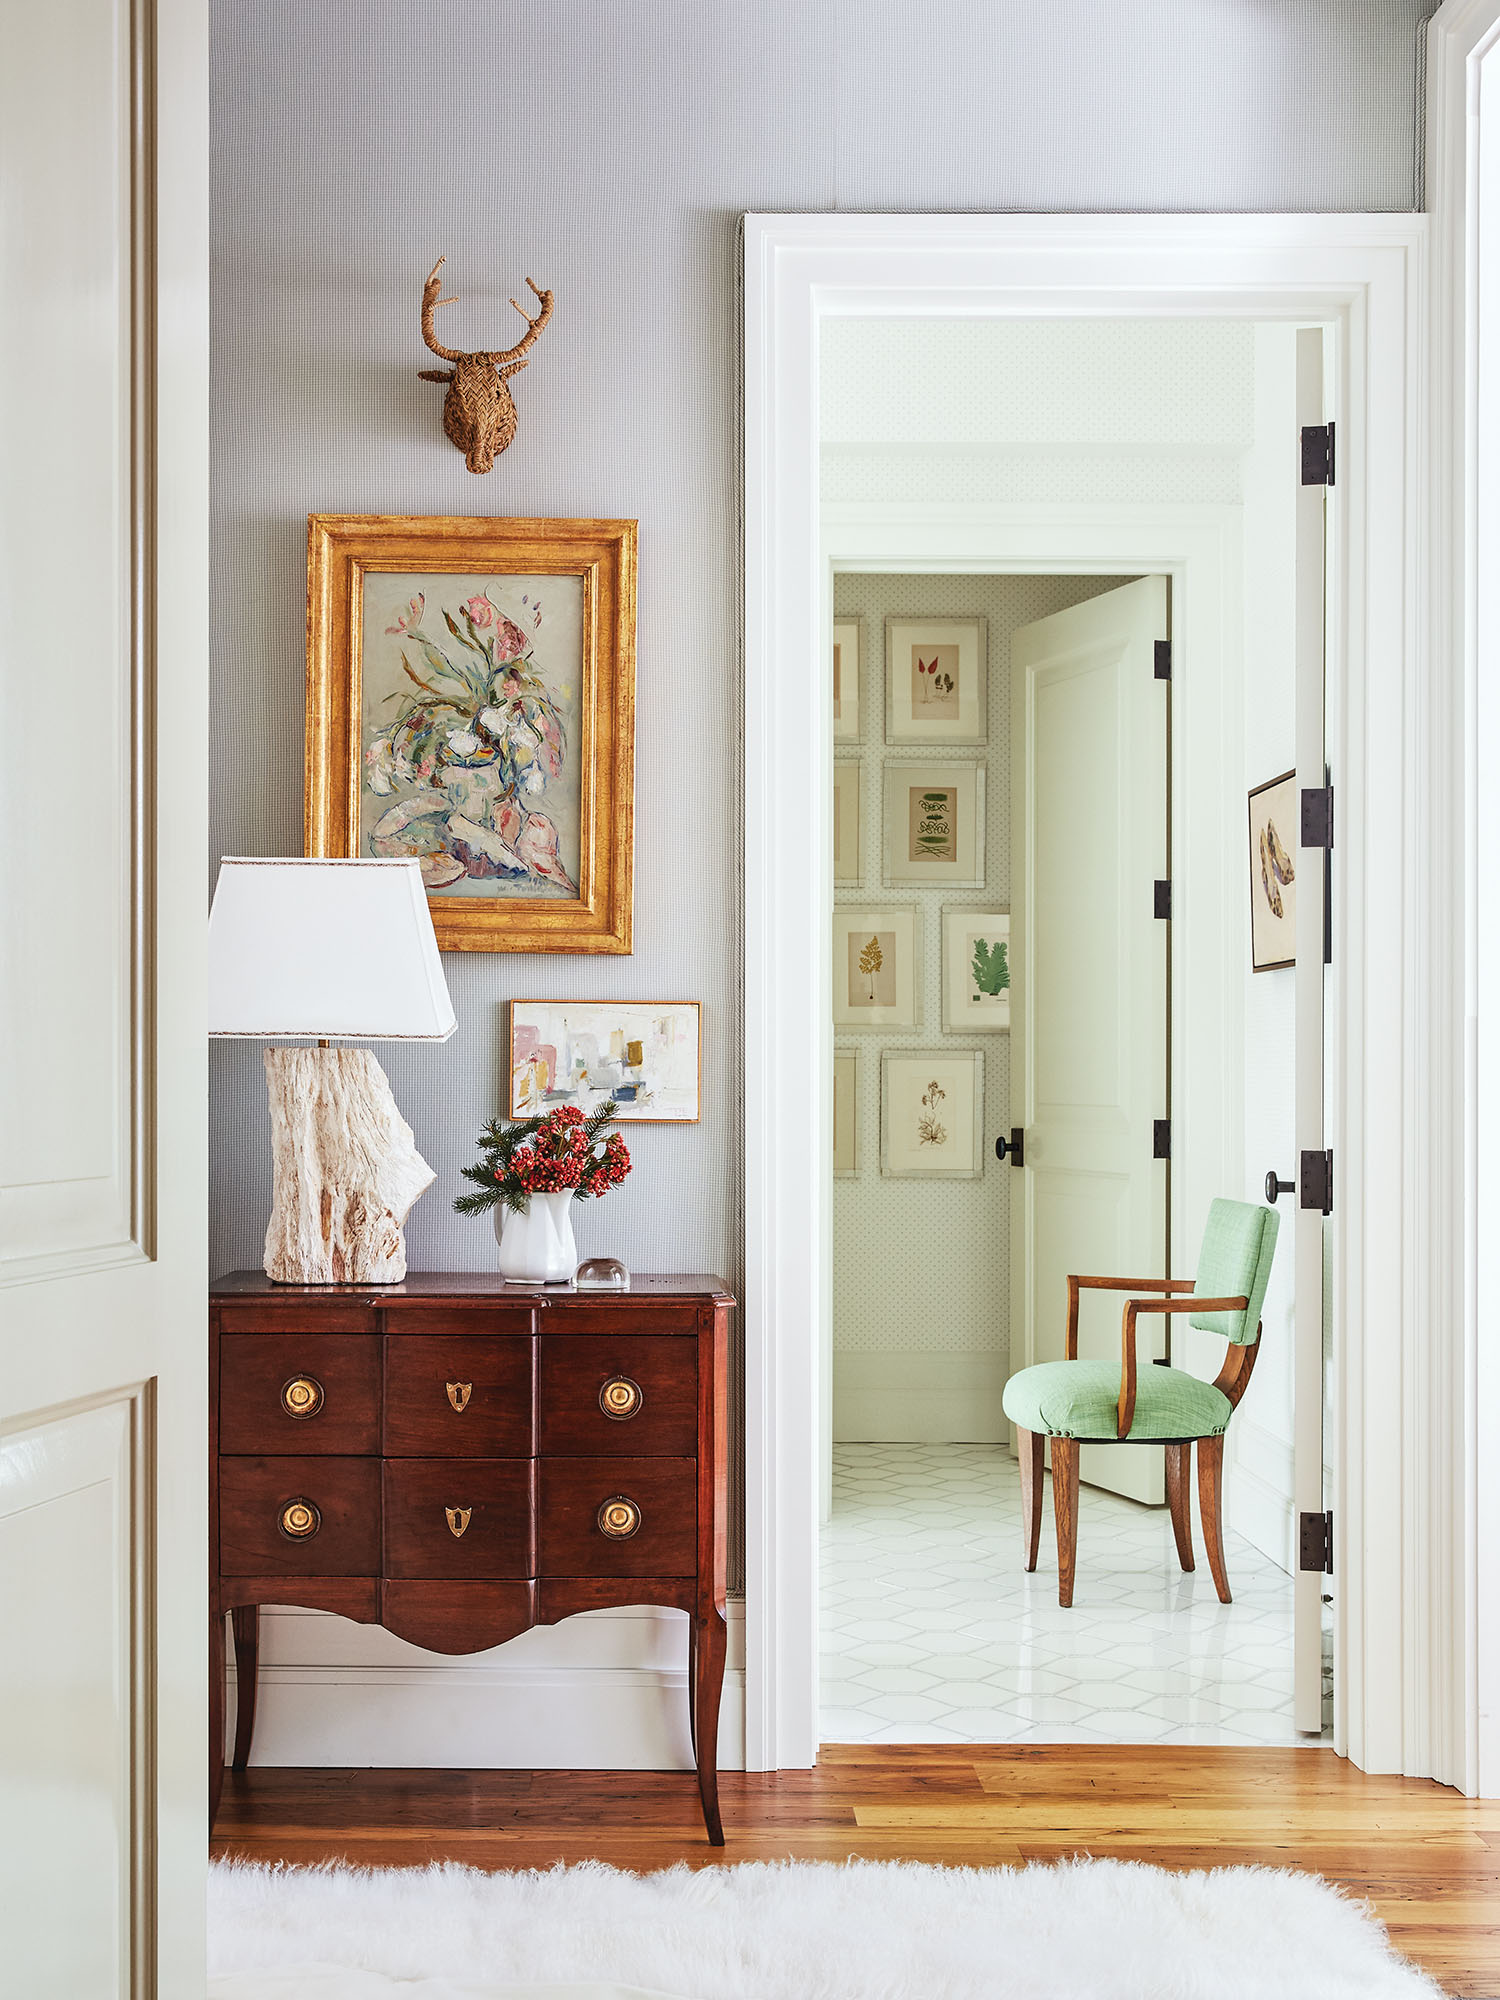 A bright hallway has a fur rug, an antique side table, a floral painting, and a green chair.